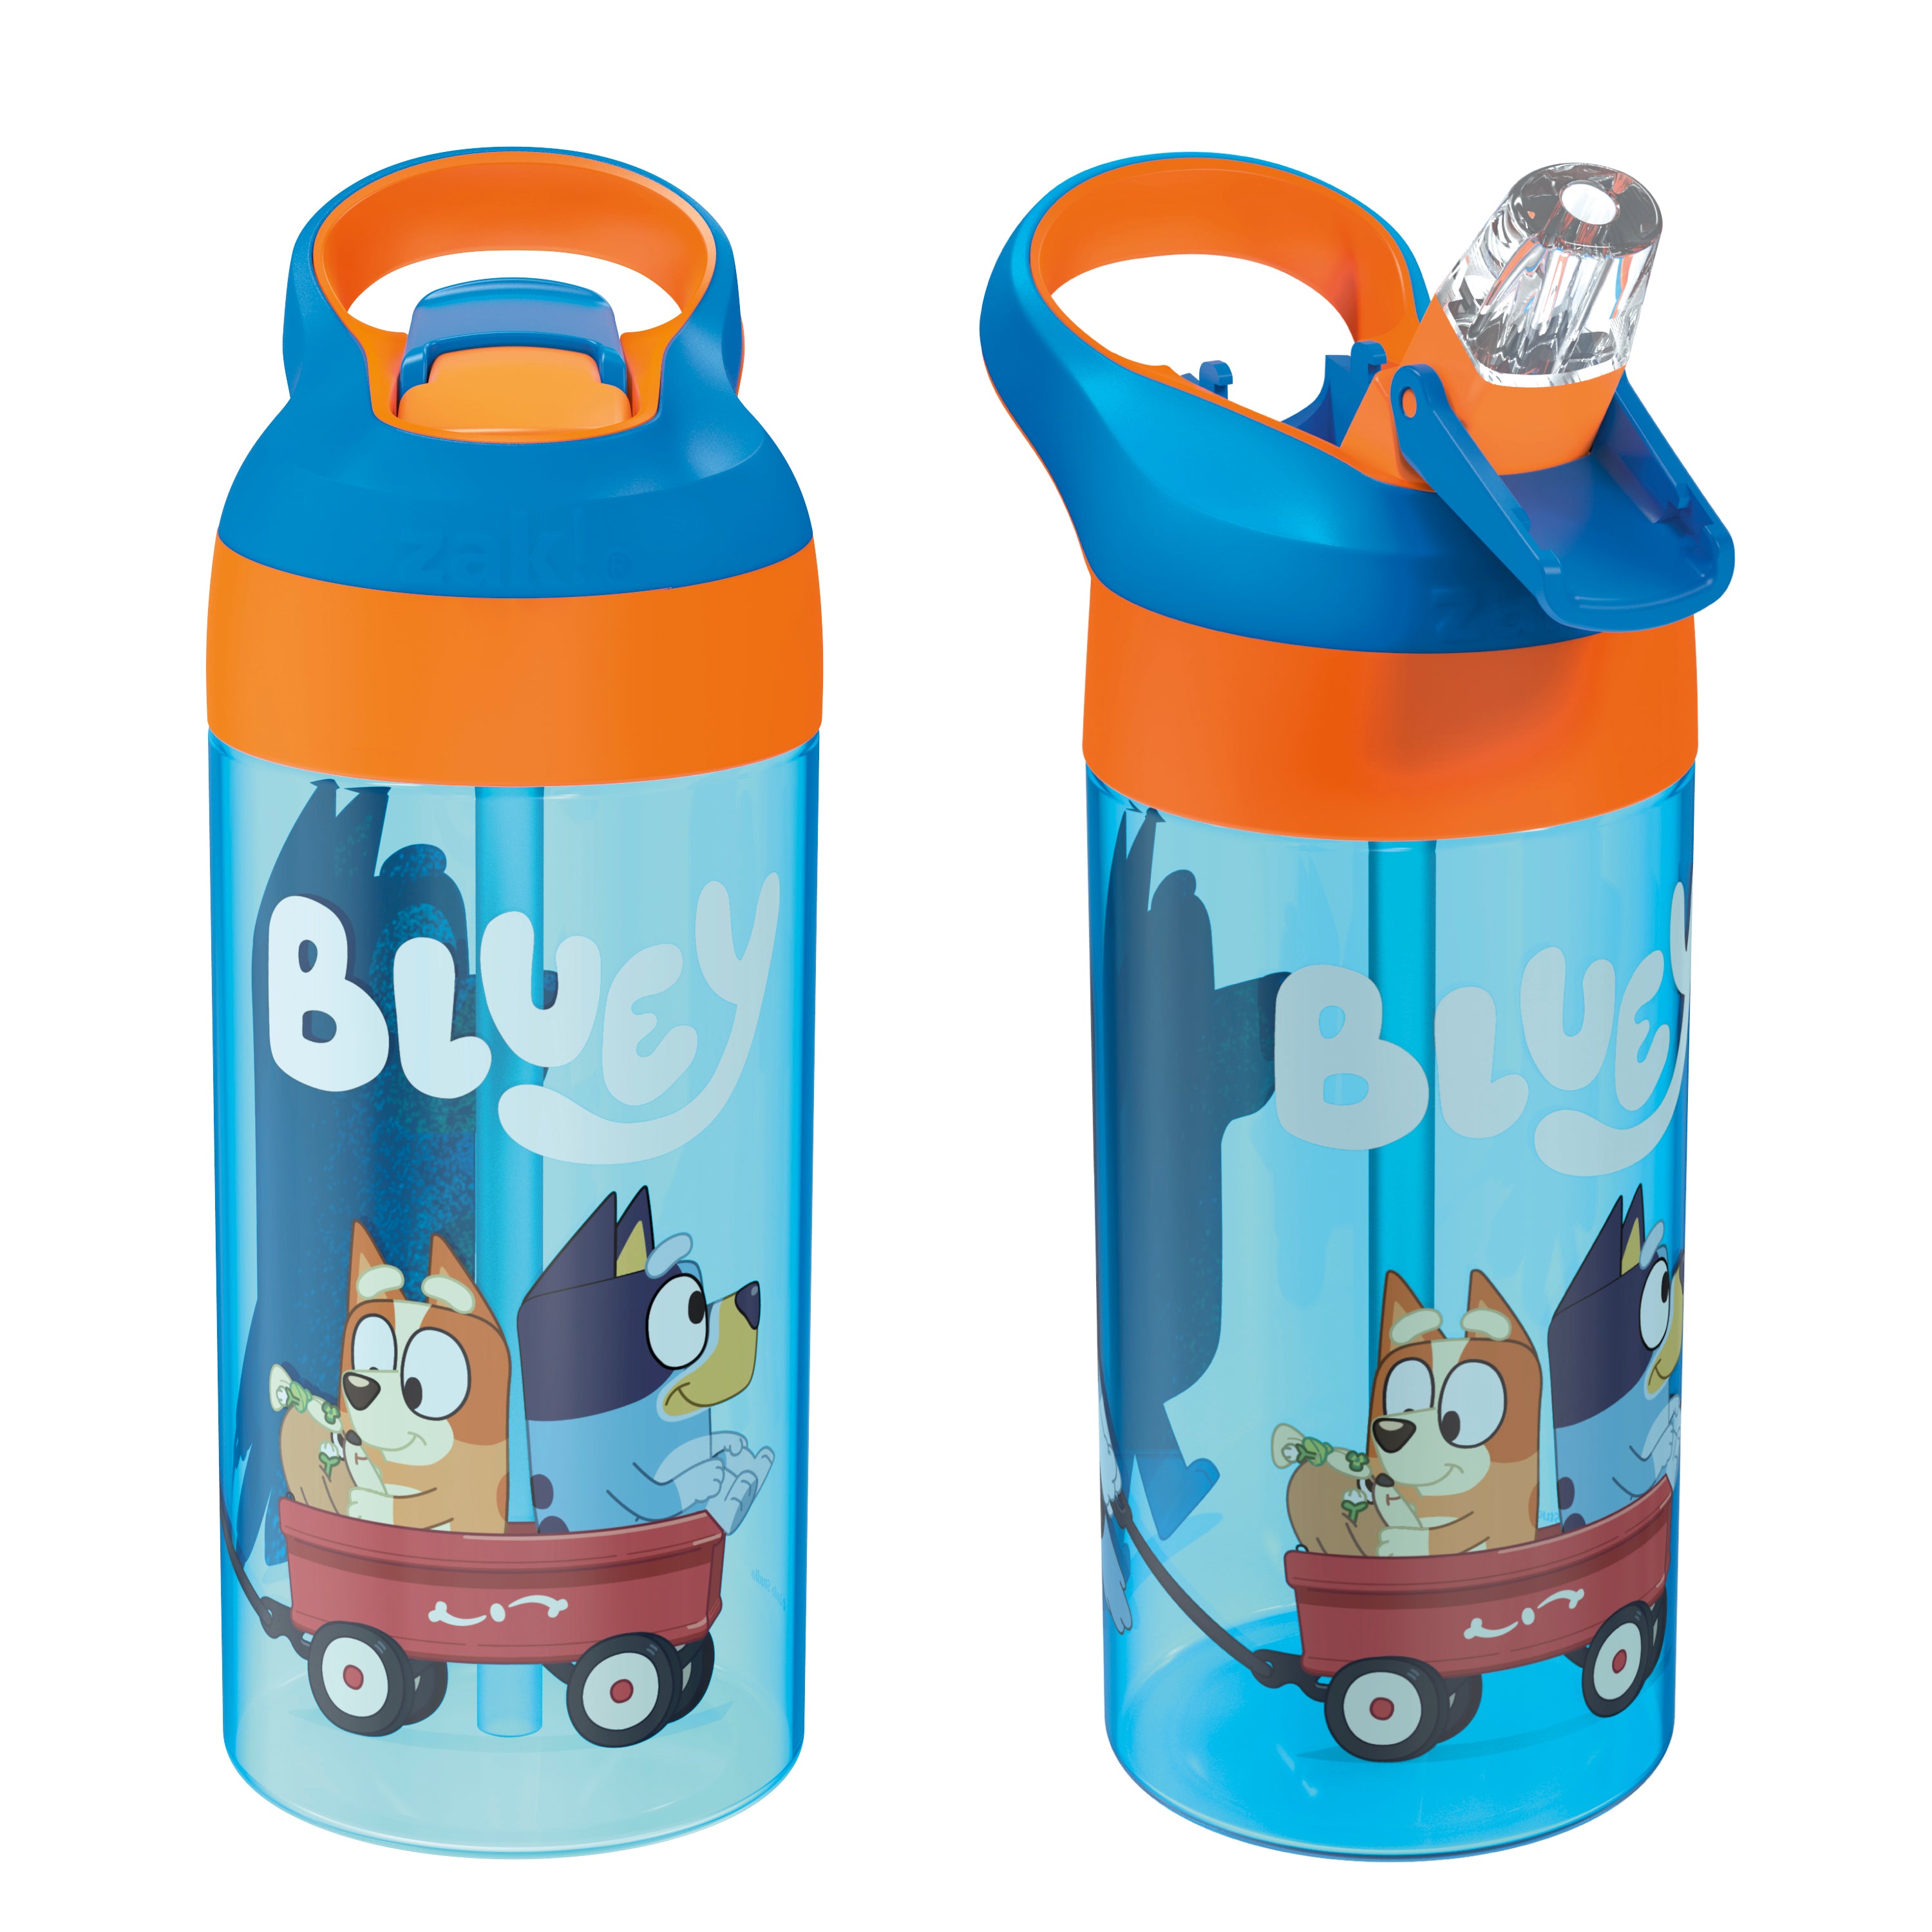 Zak Designs Bluey 14 oz Double Wall Vacuum Insulated Thermal Kids Water  Bottle, 18/8 Stainless Steel, Flip-Up Straw Spout, Locking Spout Cover,  Durable Cup for Sports or Travel 